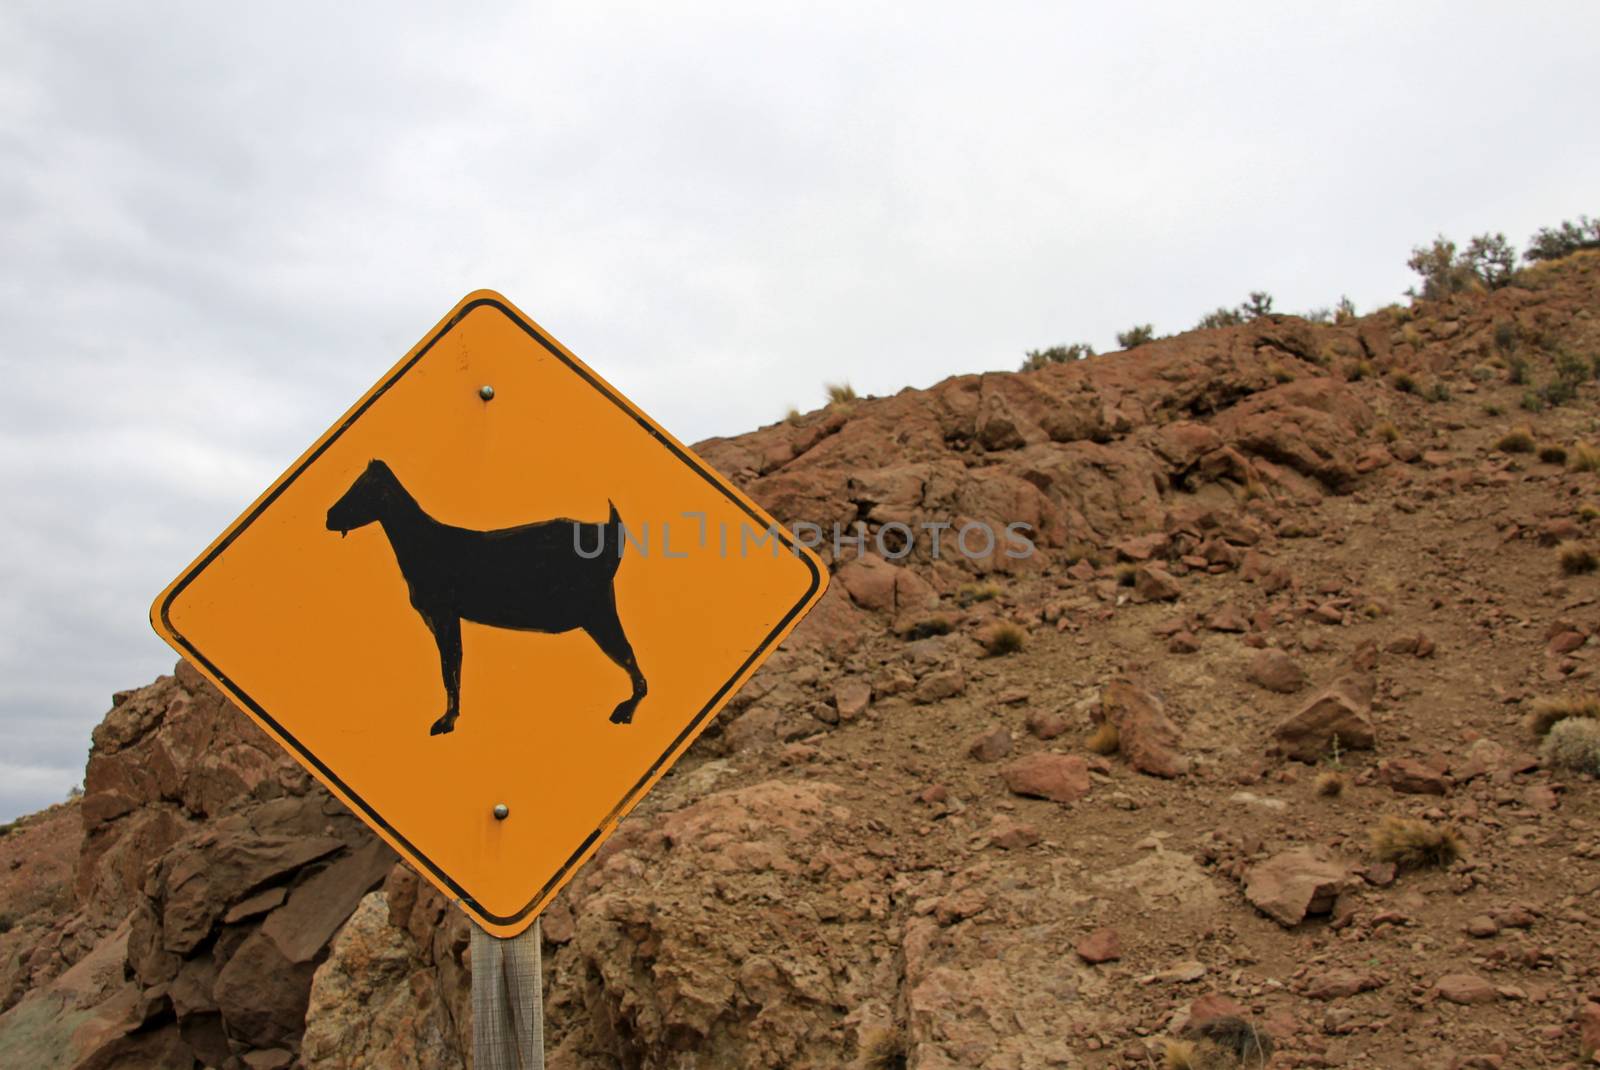 Warning sign for goats on road, Patagonia, Argentina by cicloco